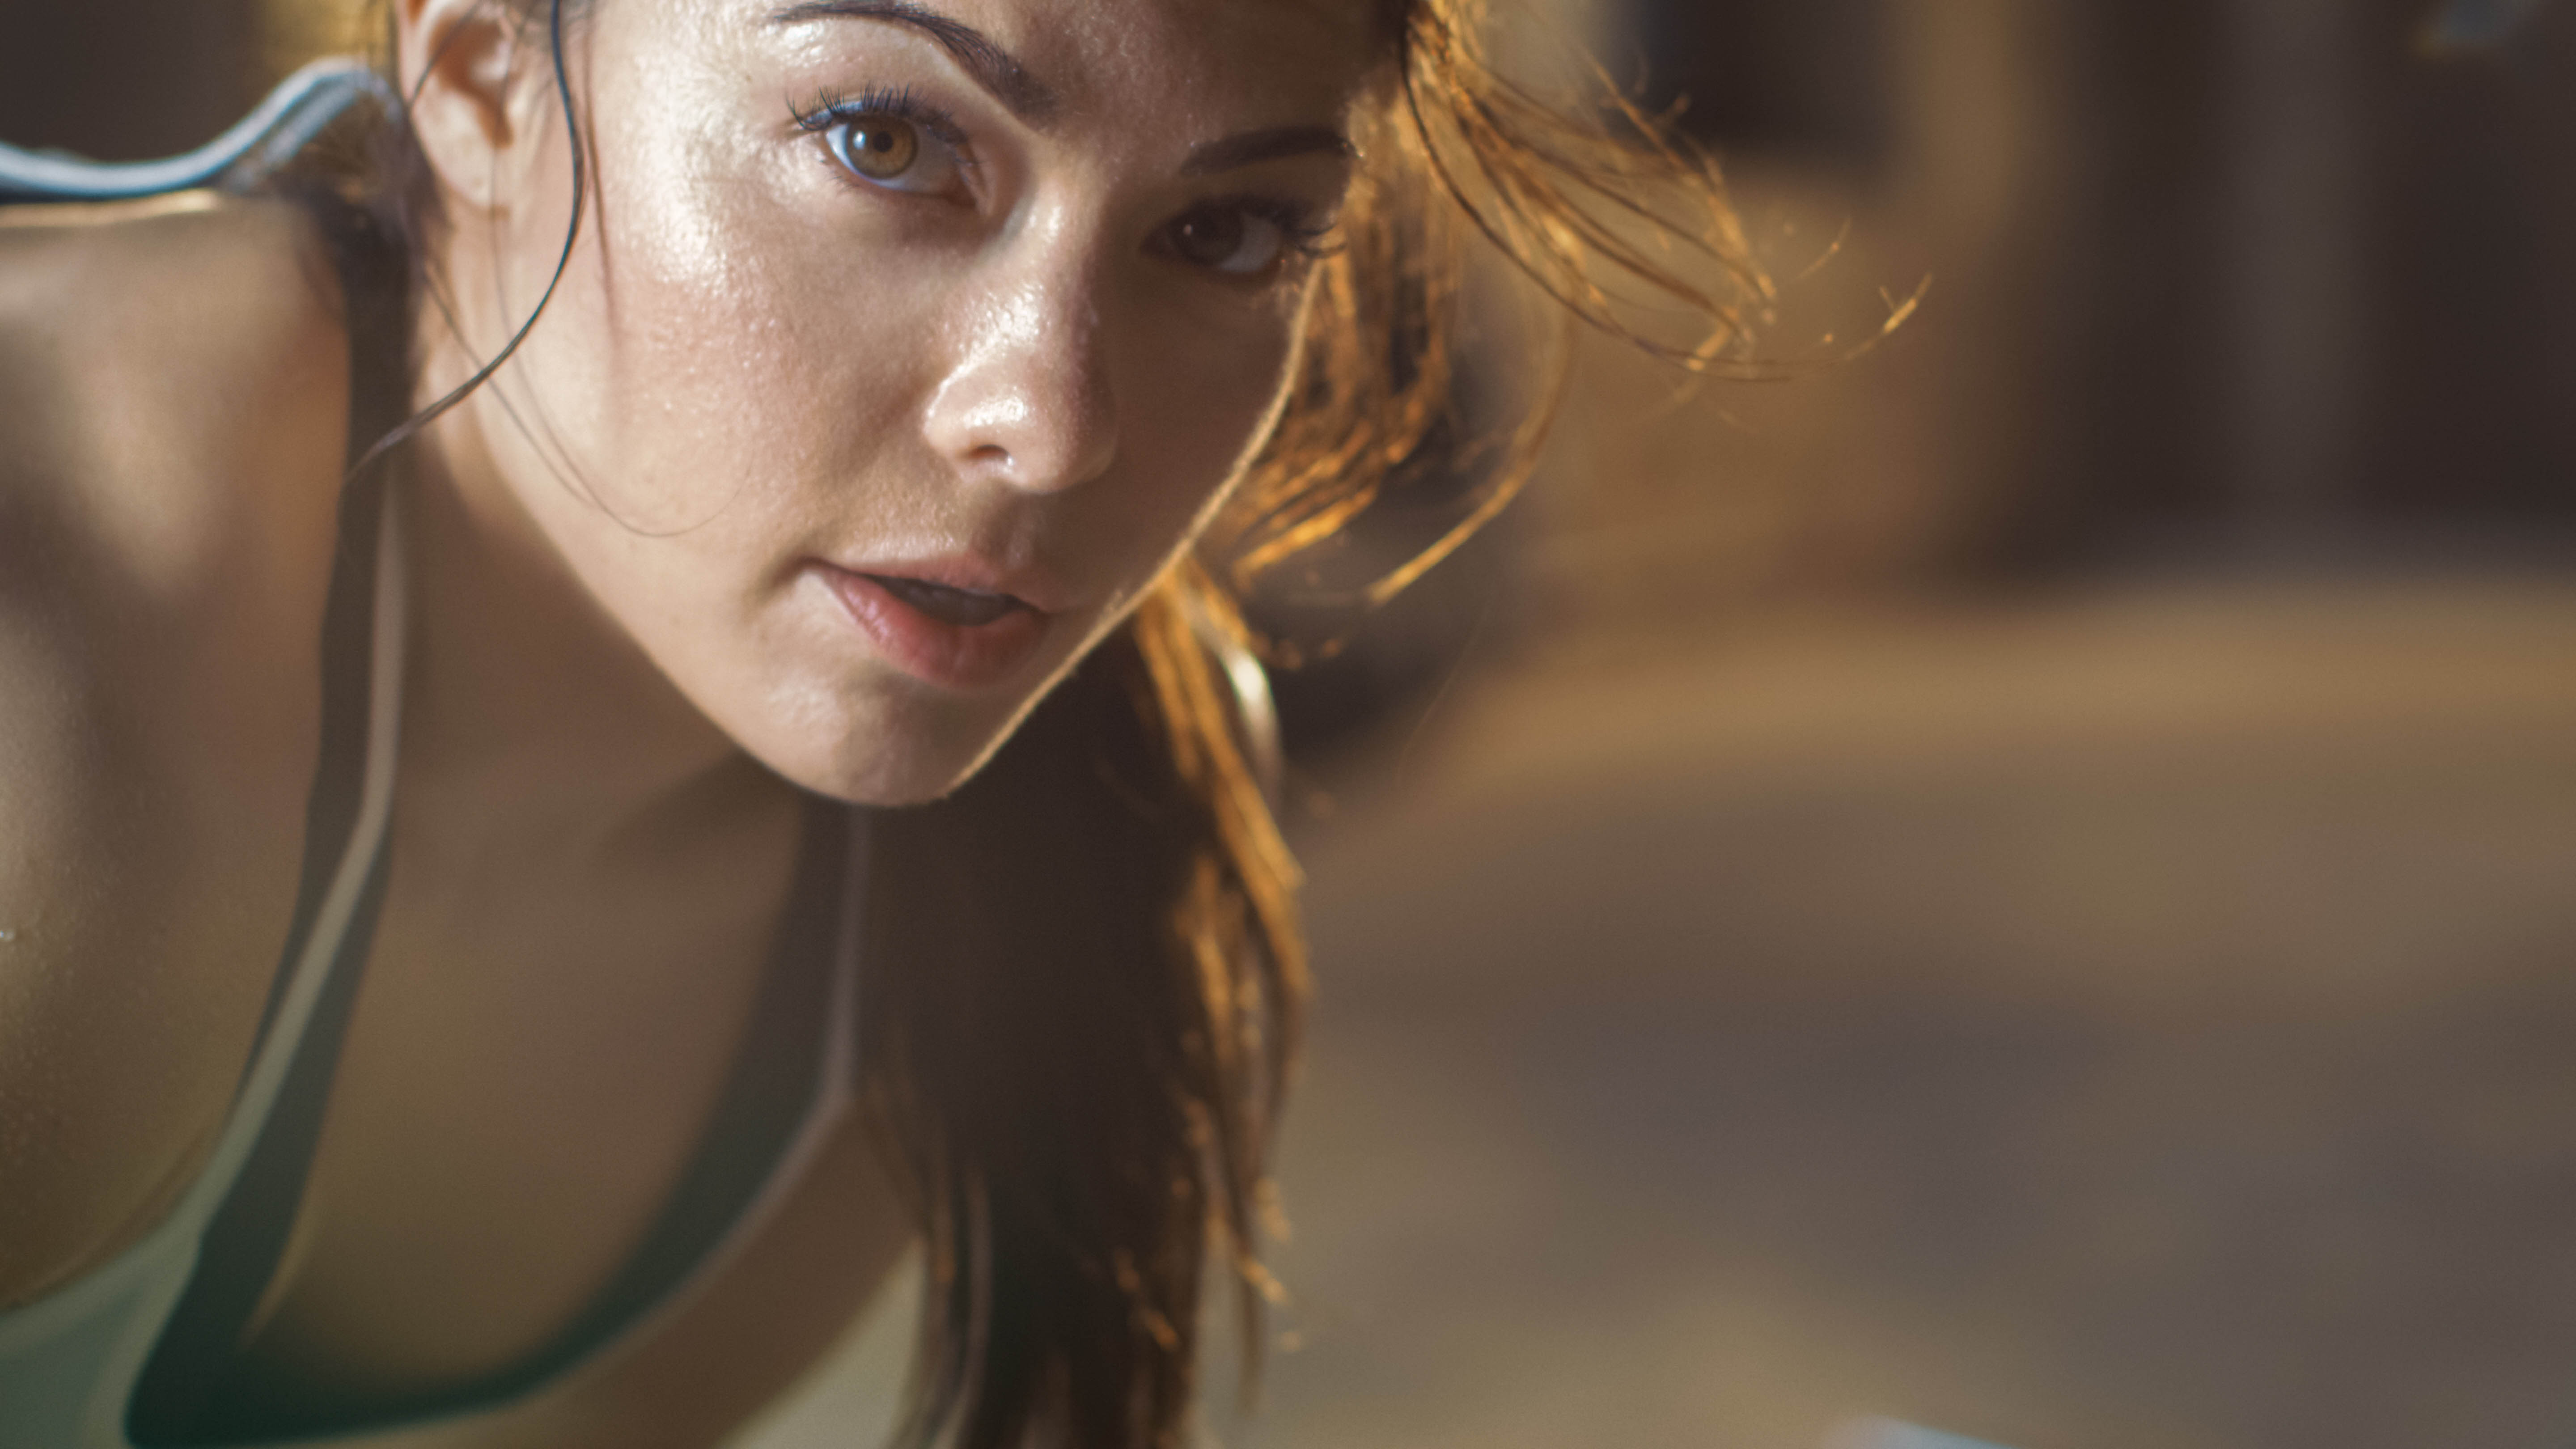 Sweaty, active woman hunched over stares into the camera, close-up